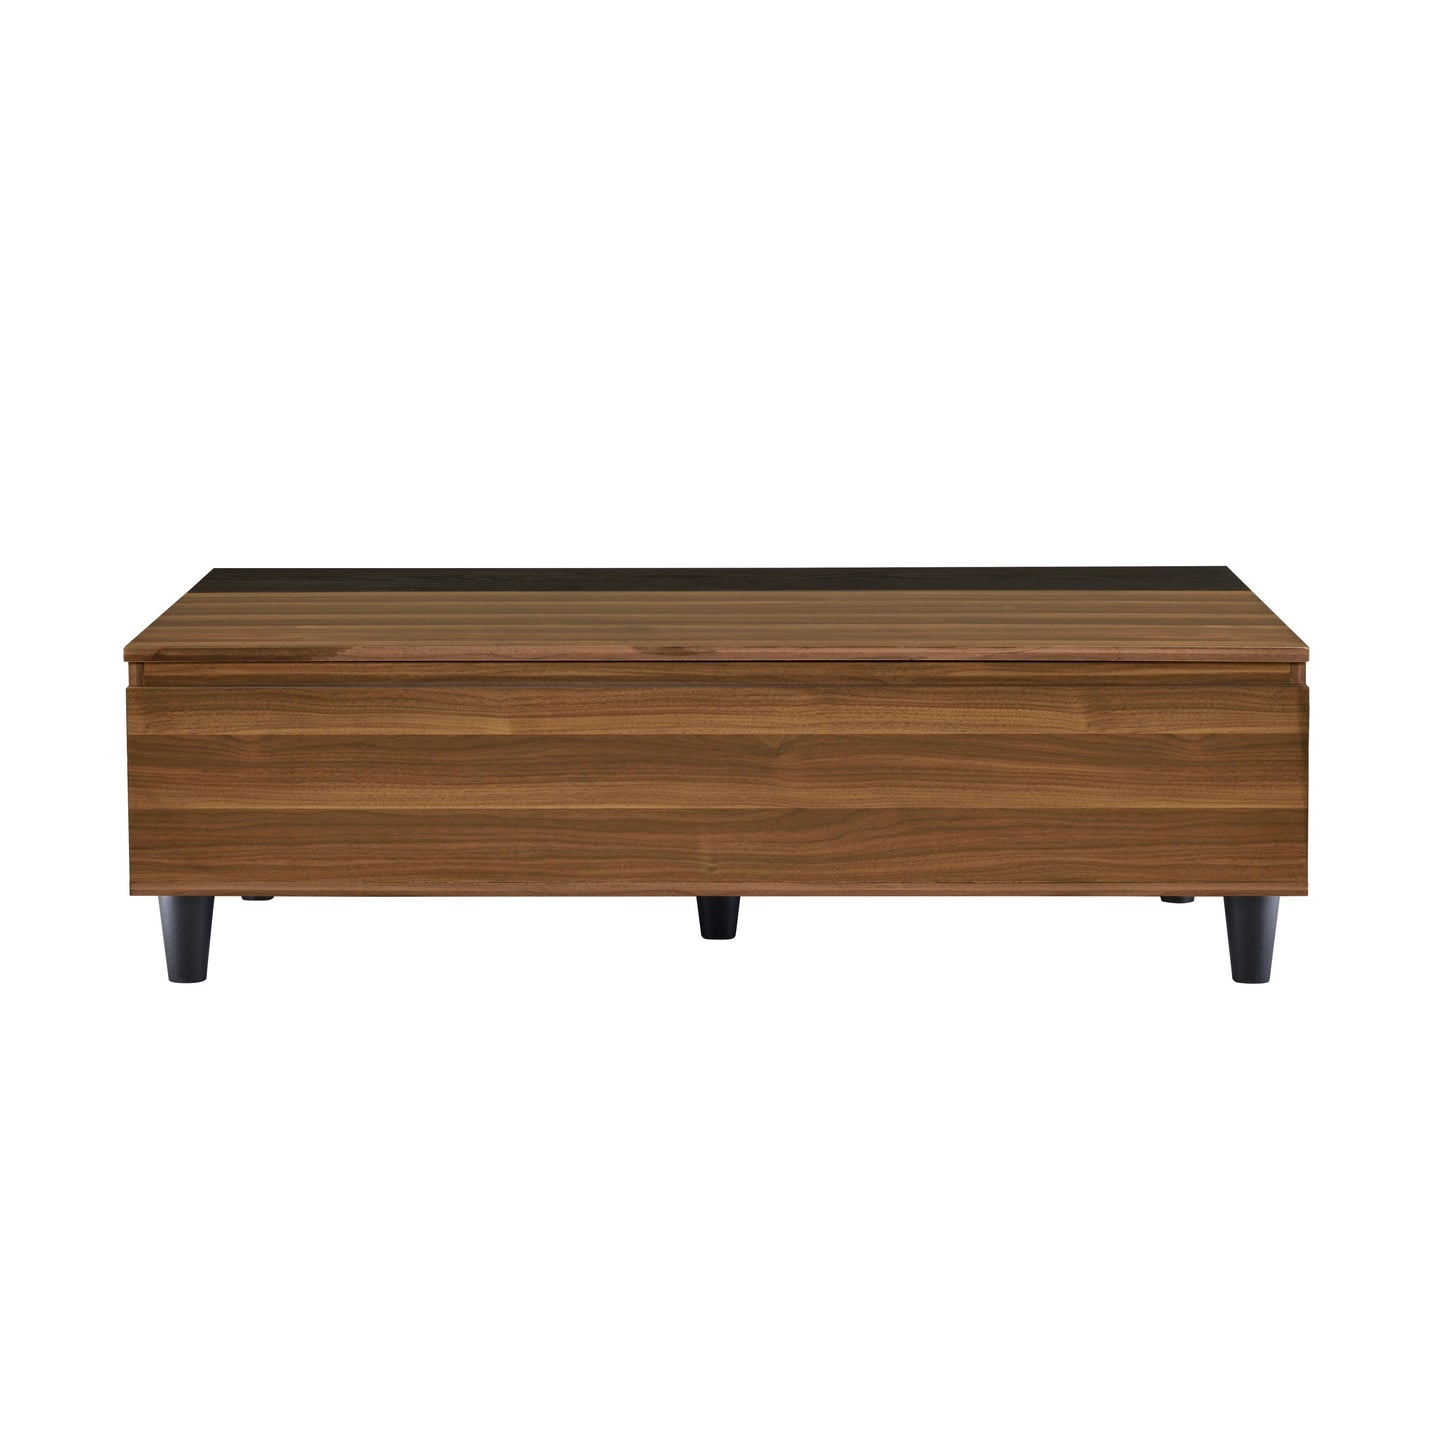 Walnut & Black Lift-Top Coffee Table with Storage Compartments